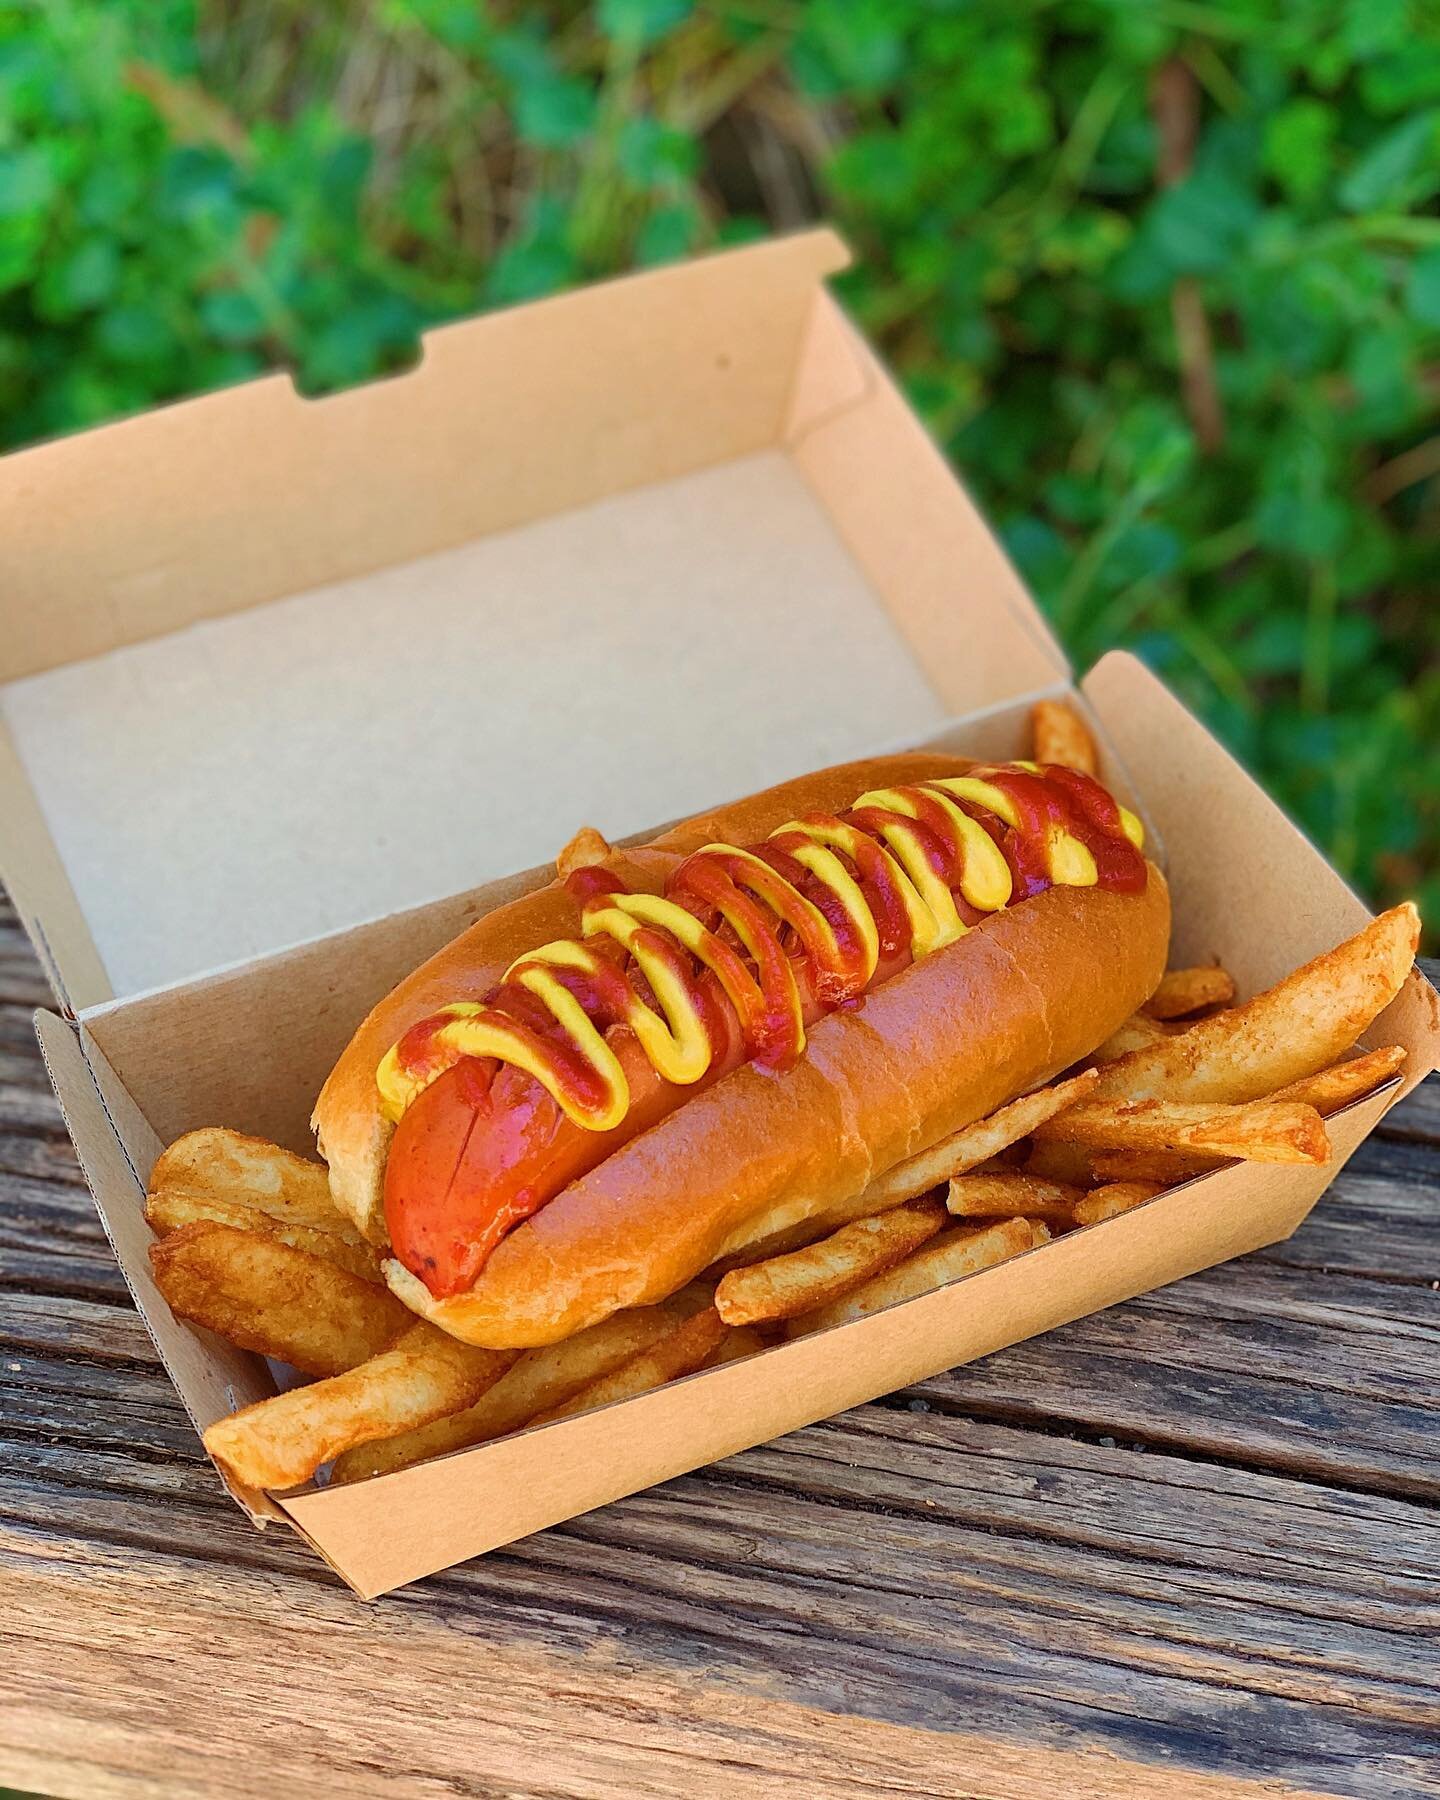 NEW TO THE SPECIALS MENU - Kransky Dogs!!😻🙊 A kransky with caramelised onion, American mustard &amp; tomato sauce in a brioche hot dog bun, served with chips! 🌭🍟 Only available until sold out, so get in quick!! 😭🌞 #kranskydog #hotdog #hotdogand